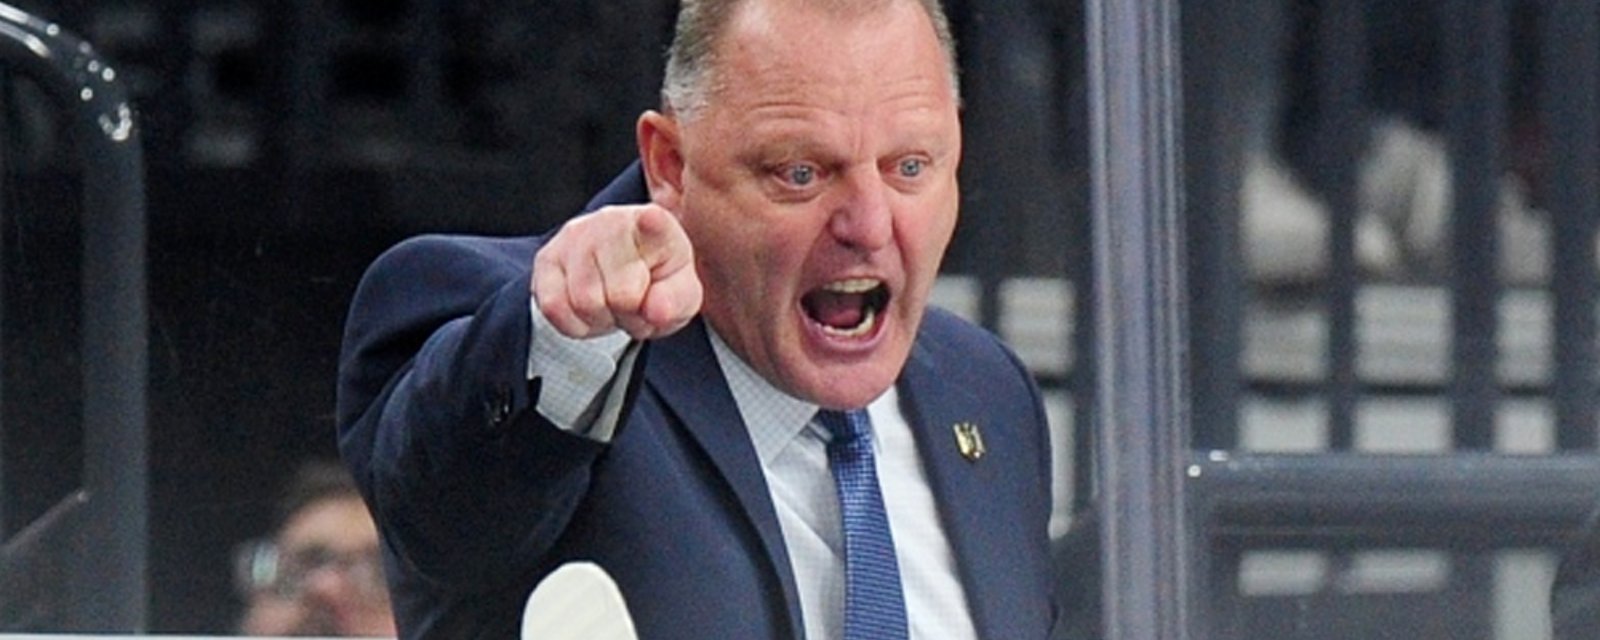 Gerard Gallant is back in the NHL, finally agrees to terms